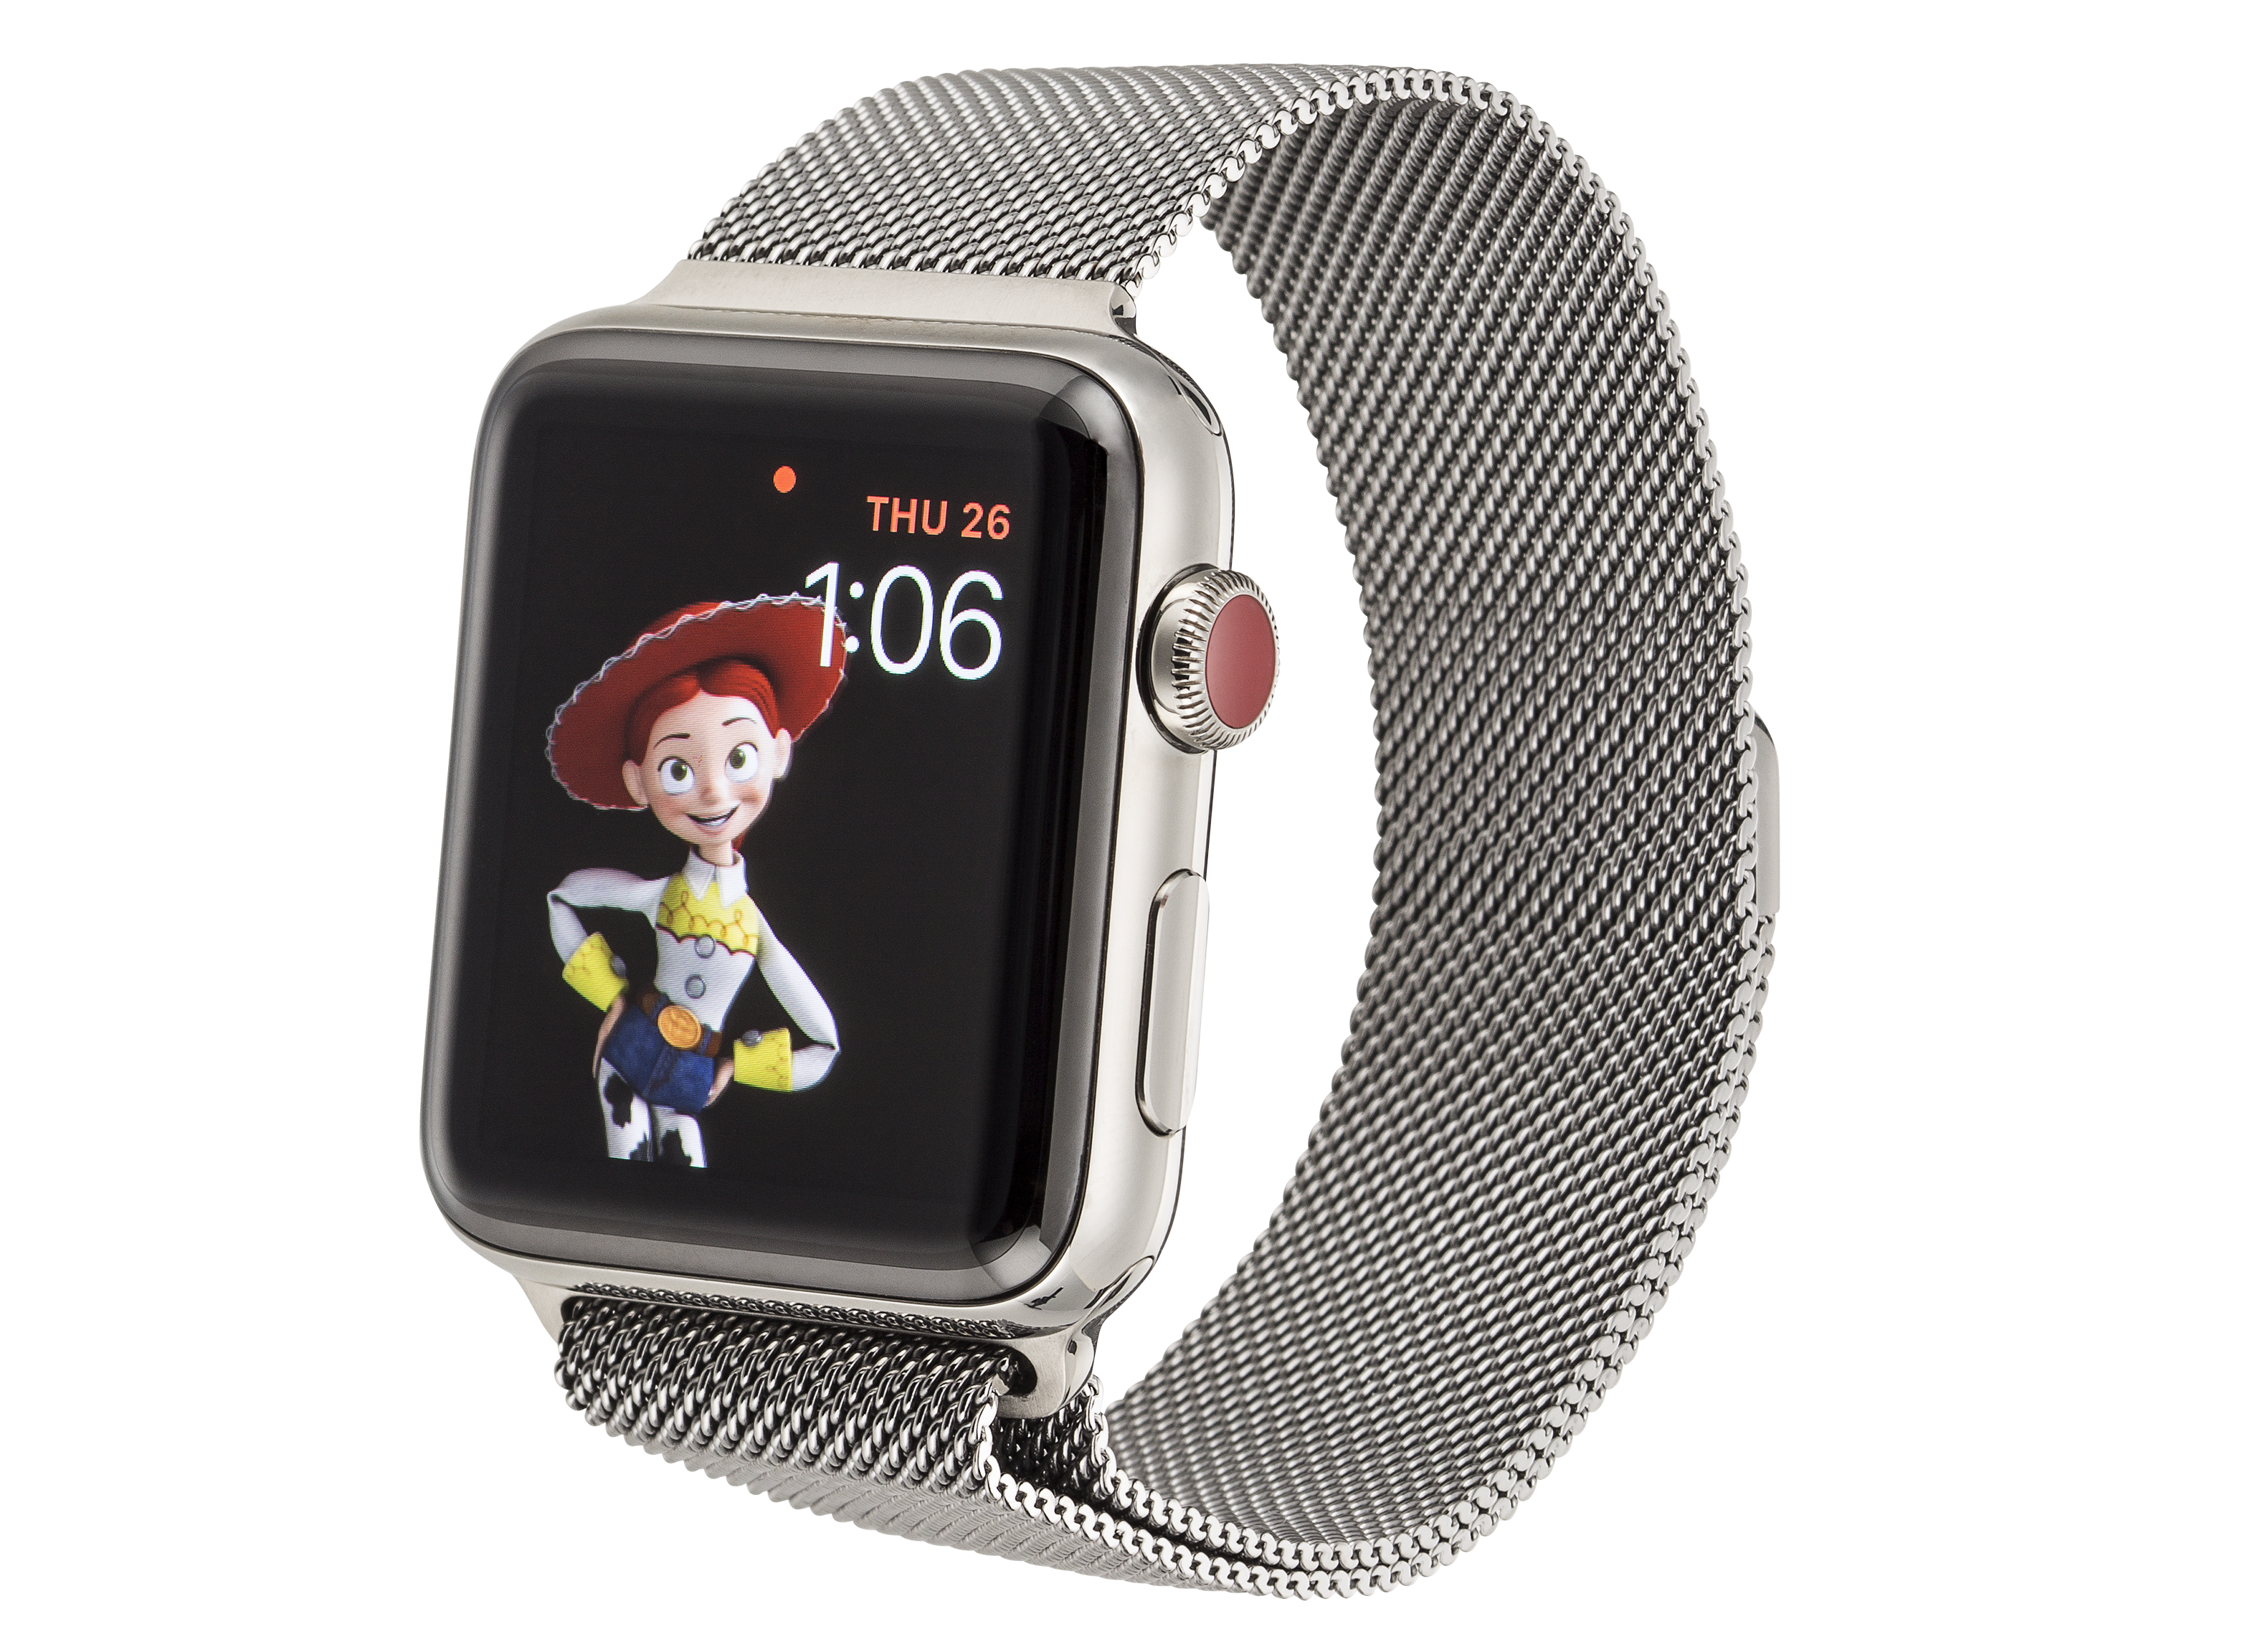 Apple Watch Series 3 (42mm) Stainless Steel case GPS + Cellular